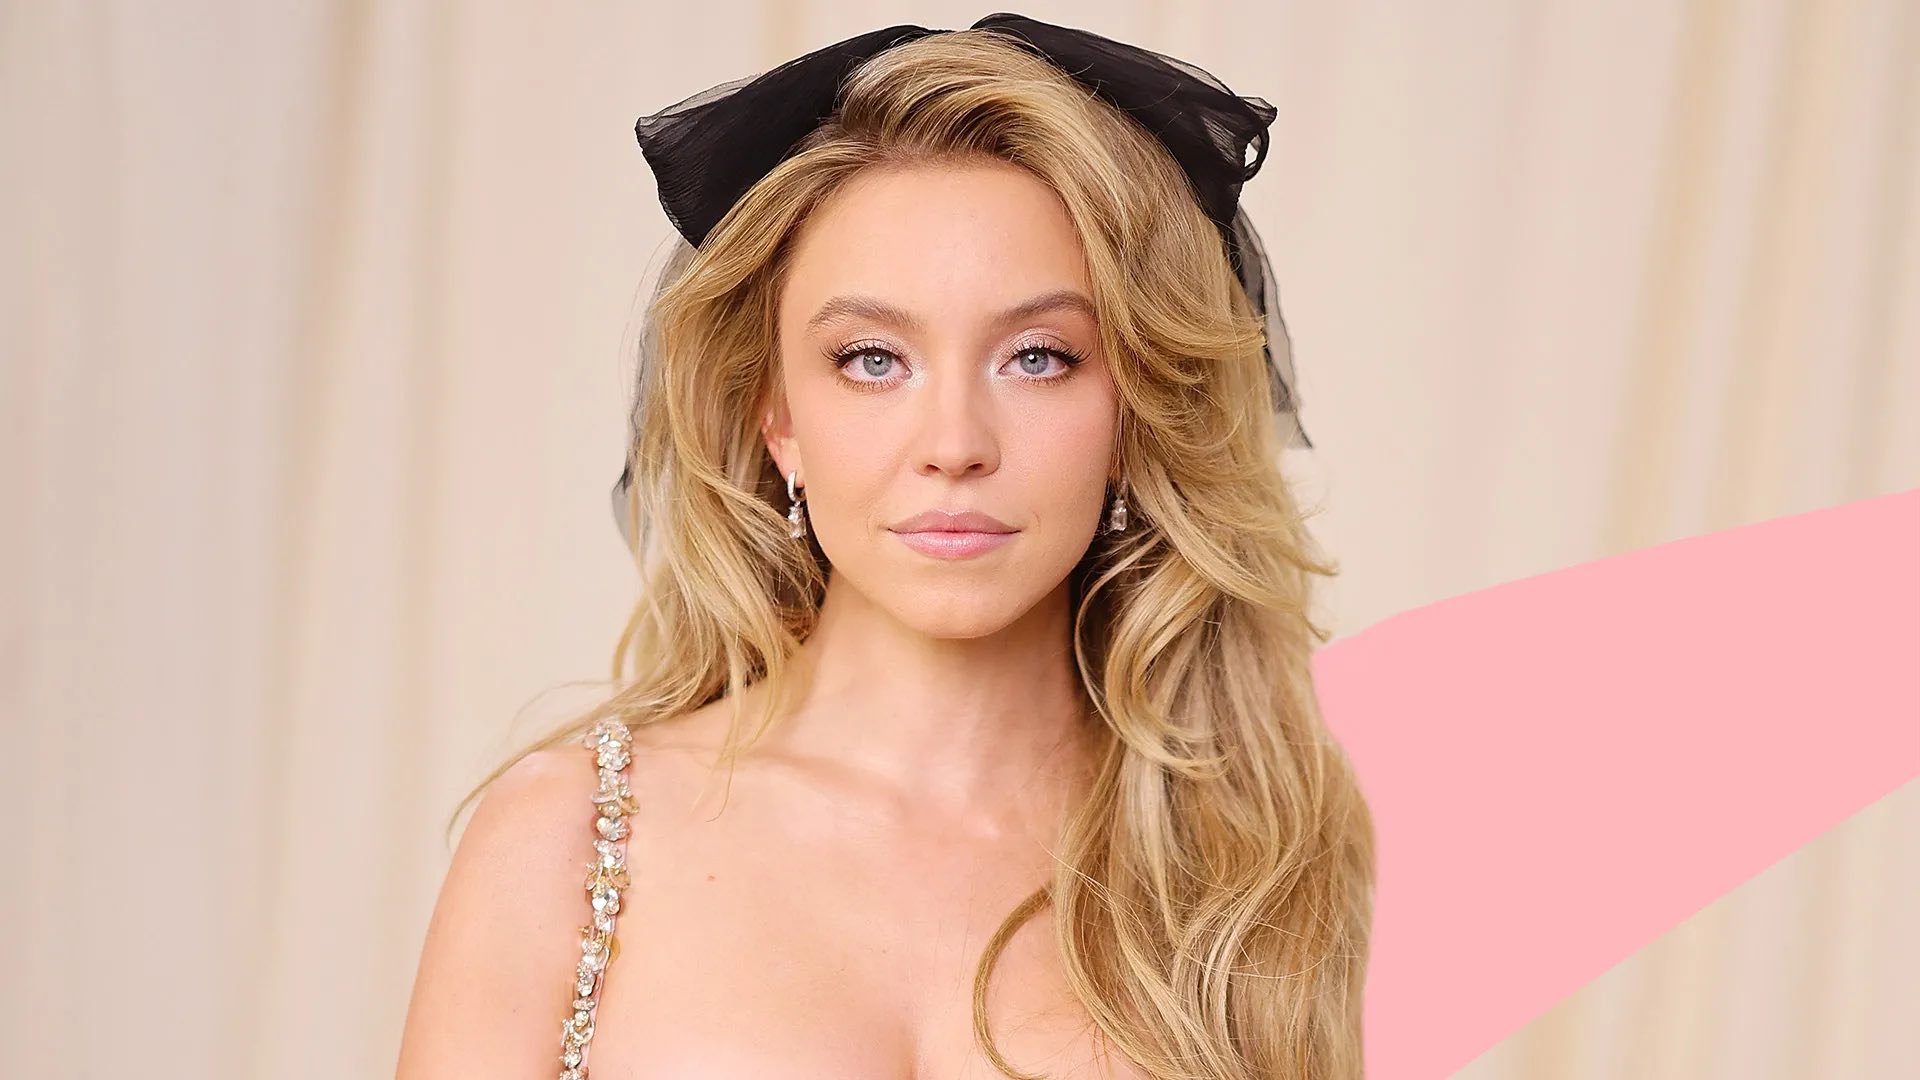 Navigate the stormy waters of Sydney Sweeney's sex scenes with us! Discover why this daring 'Euphoria' star's intimate acting has sparked such controversy.